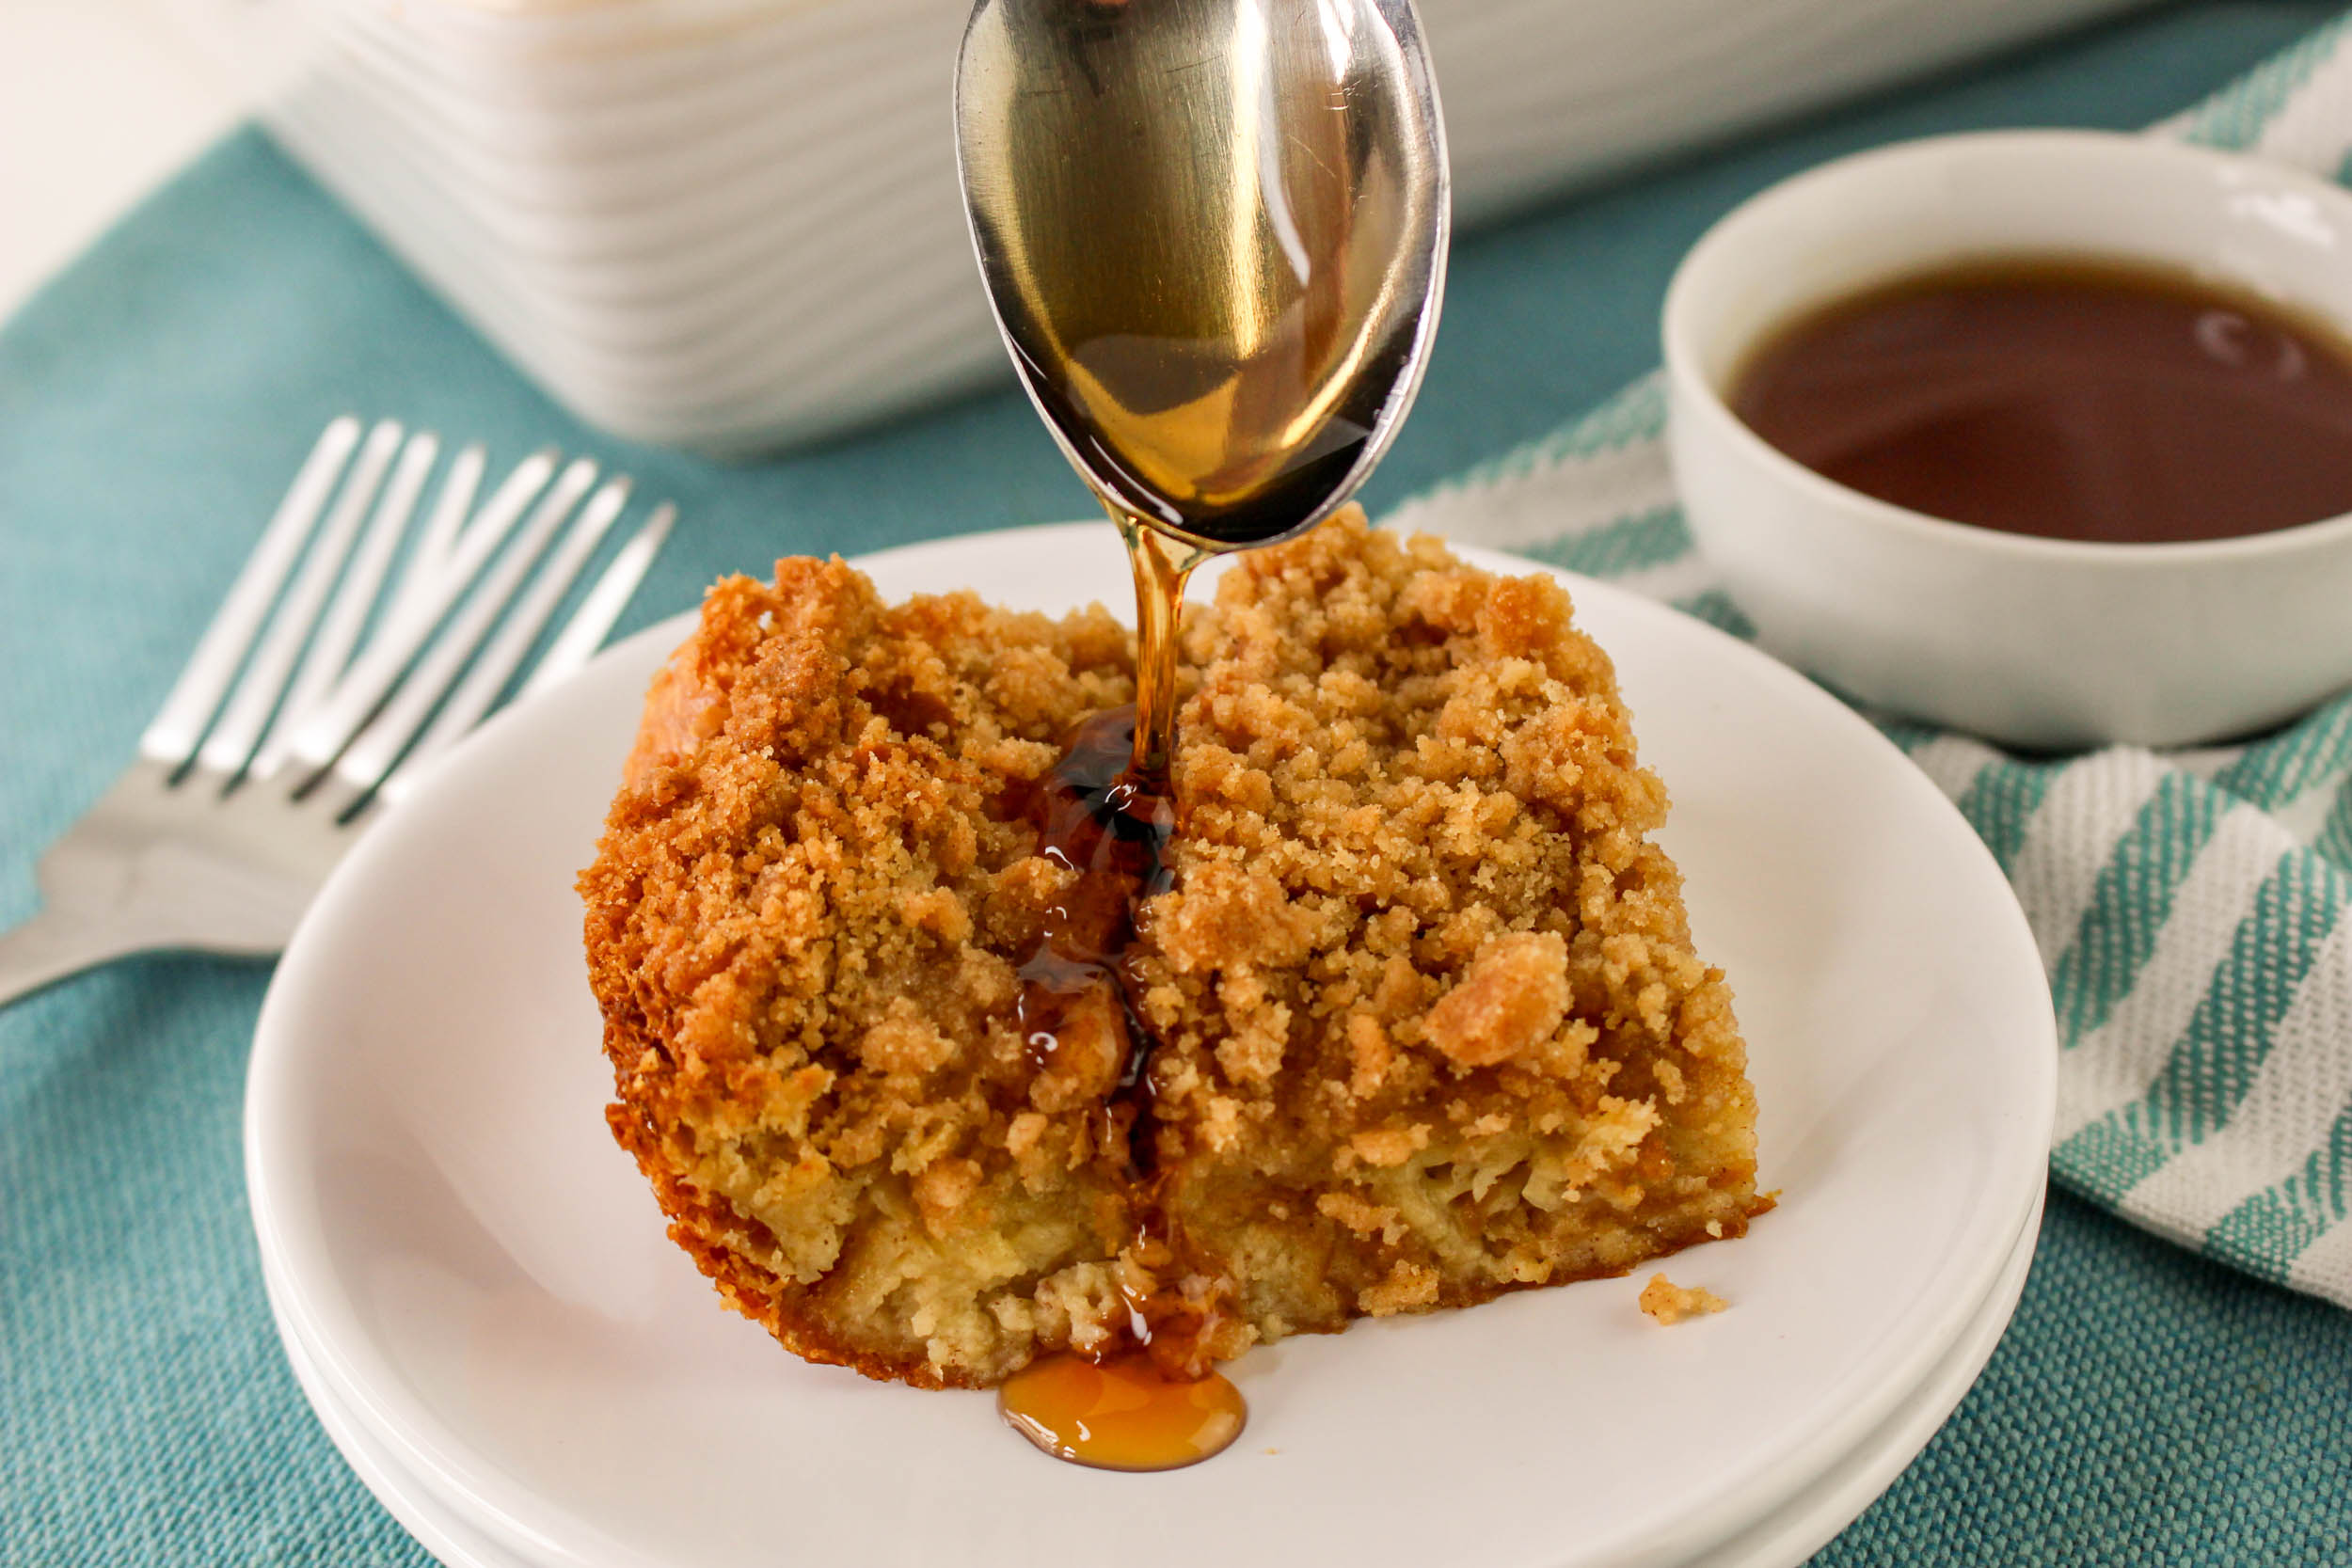 Drizzling syrup onto a crumbly piece of French toast casserole